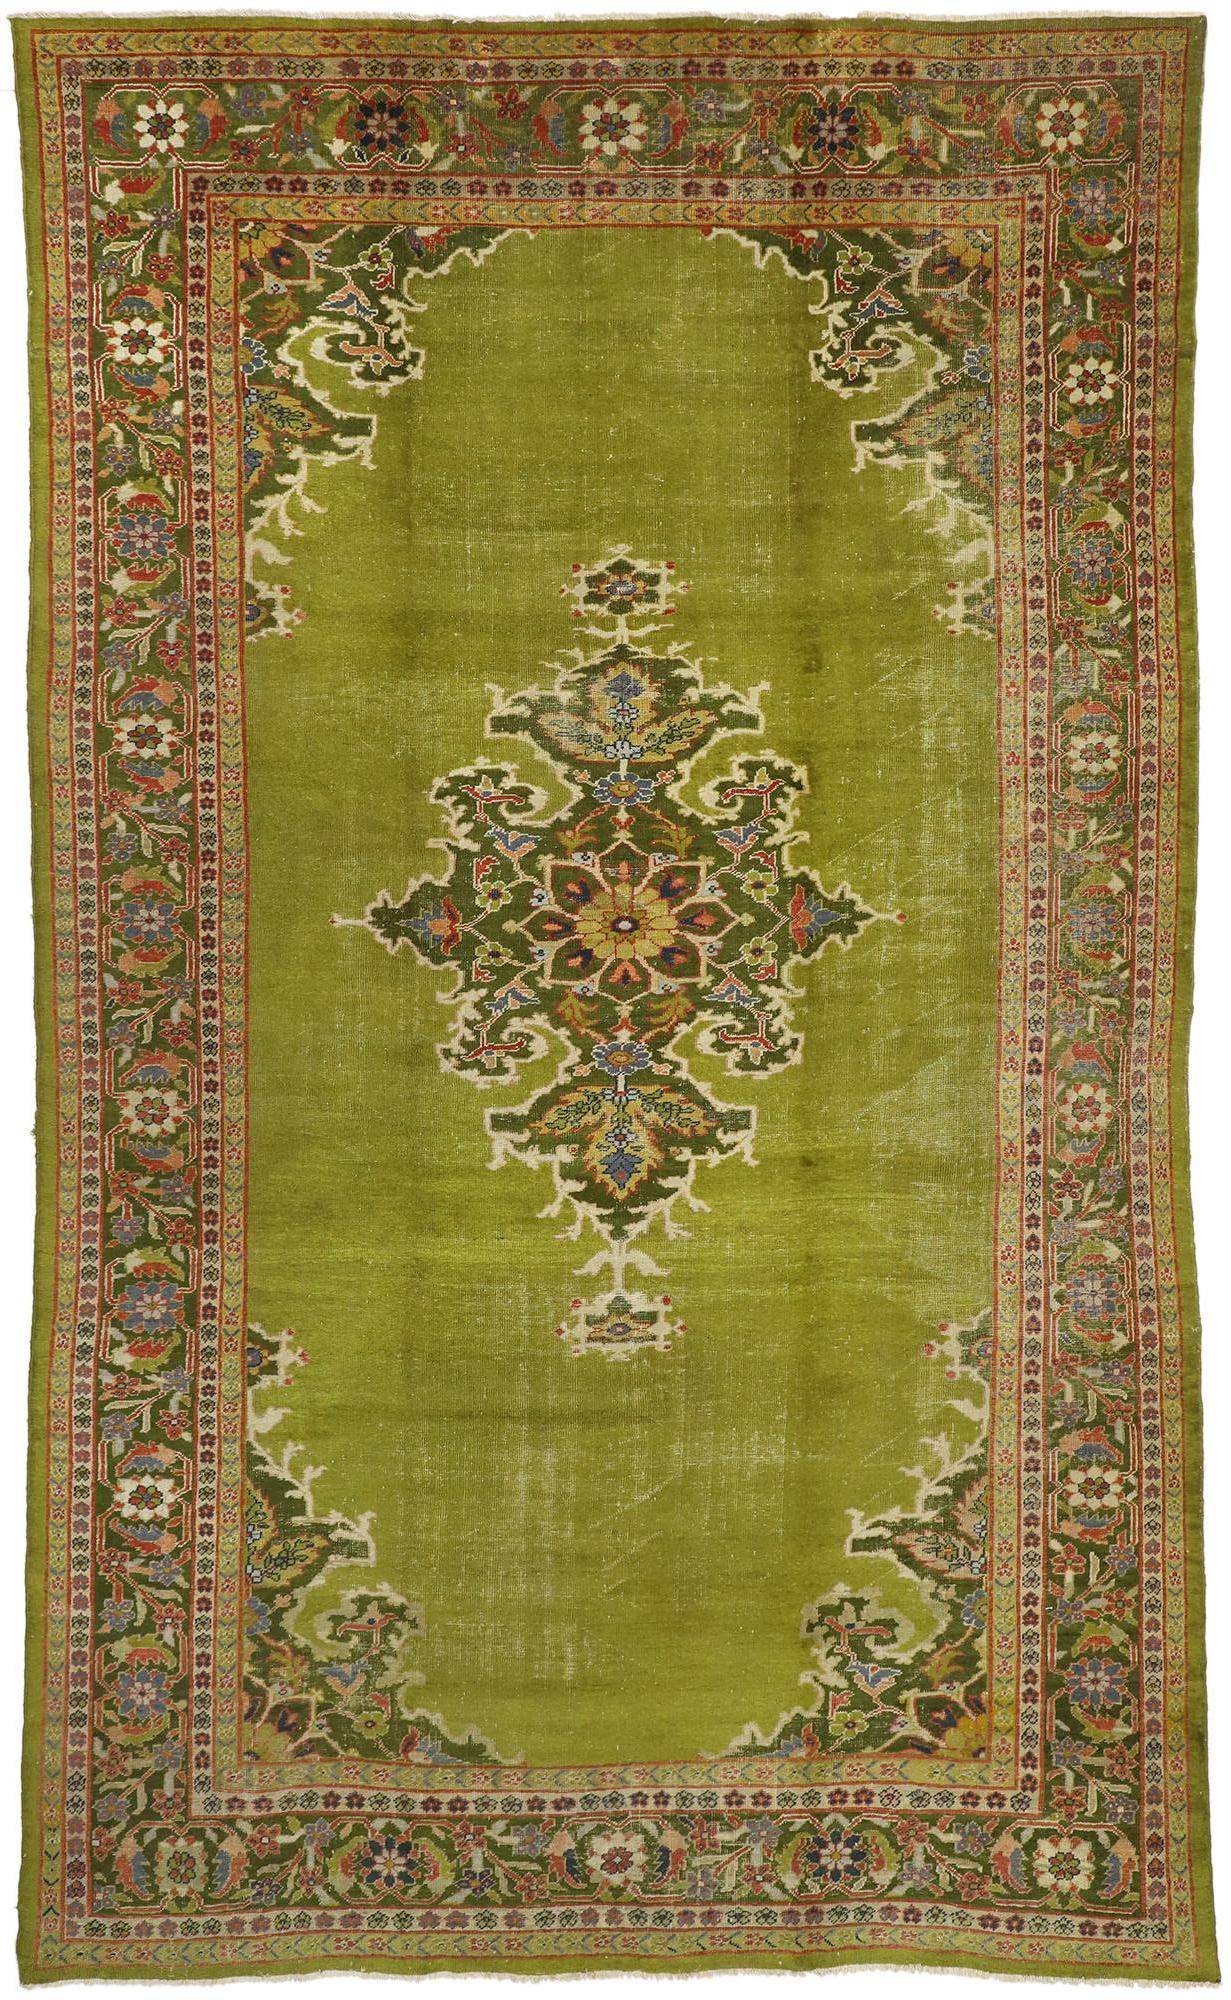 74747 Late 19th Century Distressed Antique Persian Sultanabad Palace Rug with Bold English Chintz Style 08'11 x 15'00. Balancing a timeless floral design in bold colors with traditional sensibility and a lovingly timeworn patina, this hand knotted